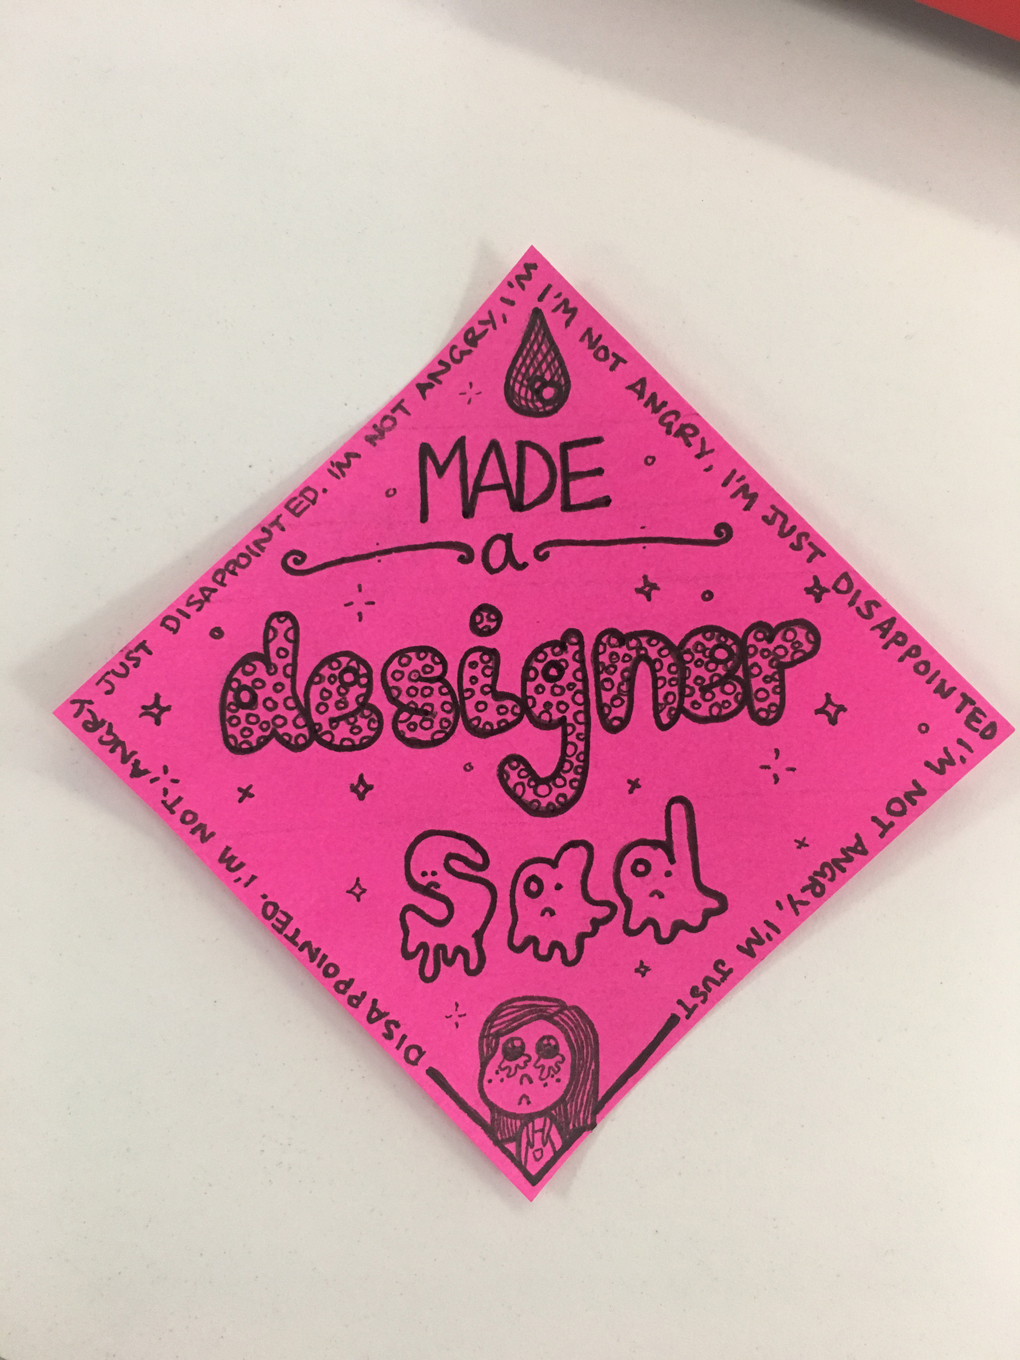 a badge made out of a post-it commemorating the achievement of disappointing a designer. It reads 